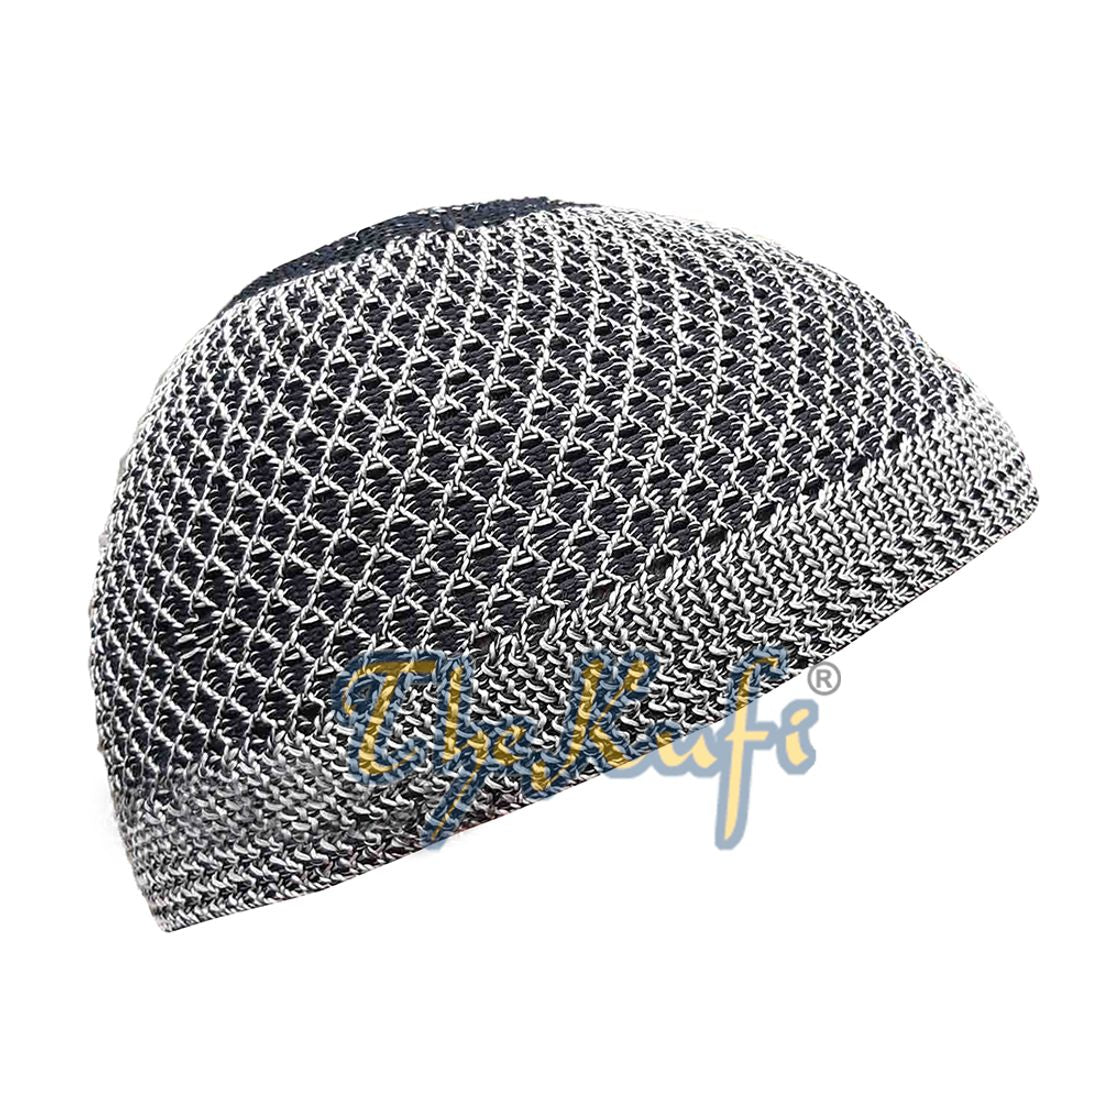 Faded Light Brown Black Open-Weave Nylon Stretchy Kufi